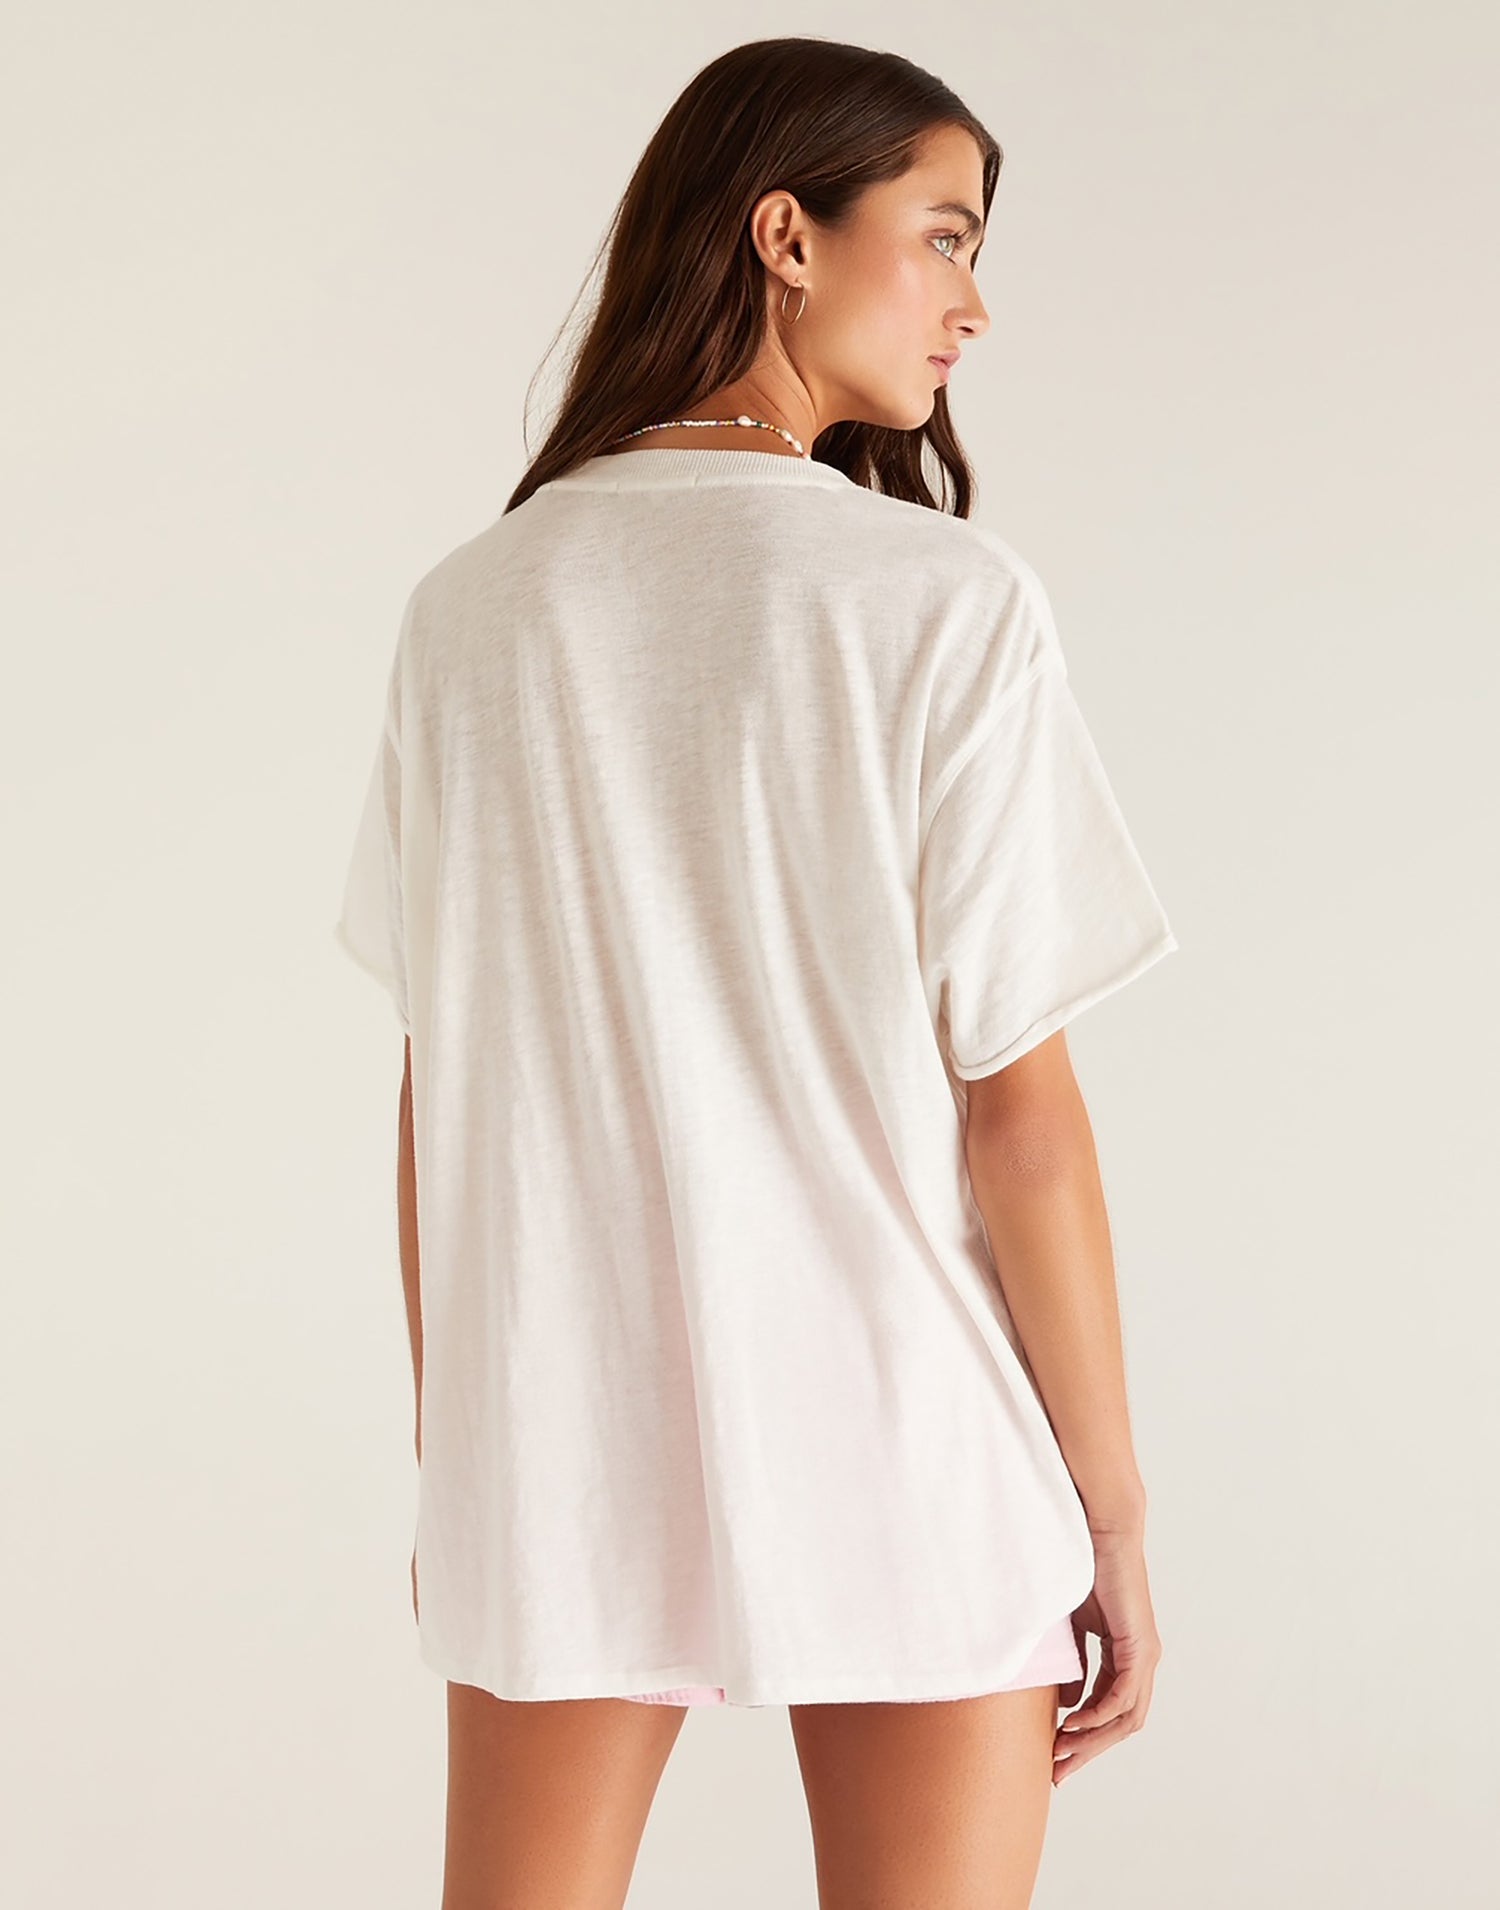 Oversized Time Flies Tee by Z Supply in White Shell - Back View